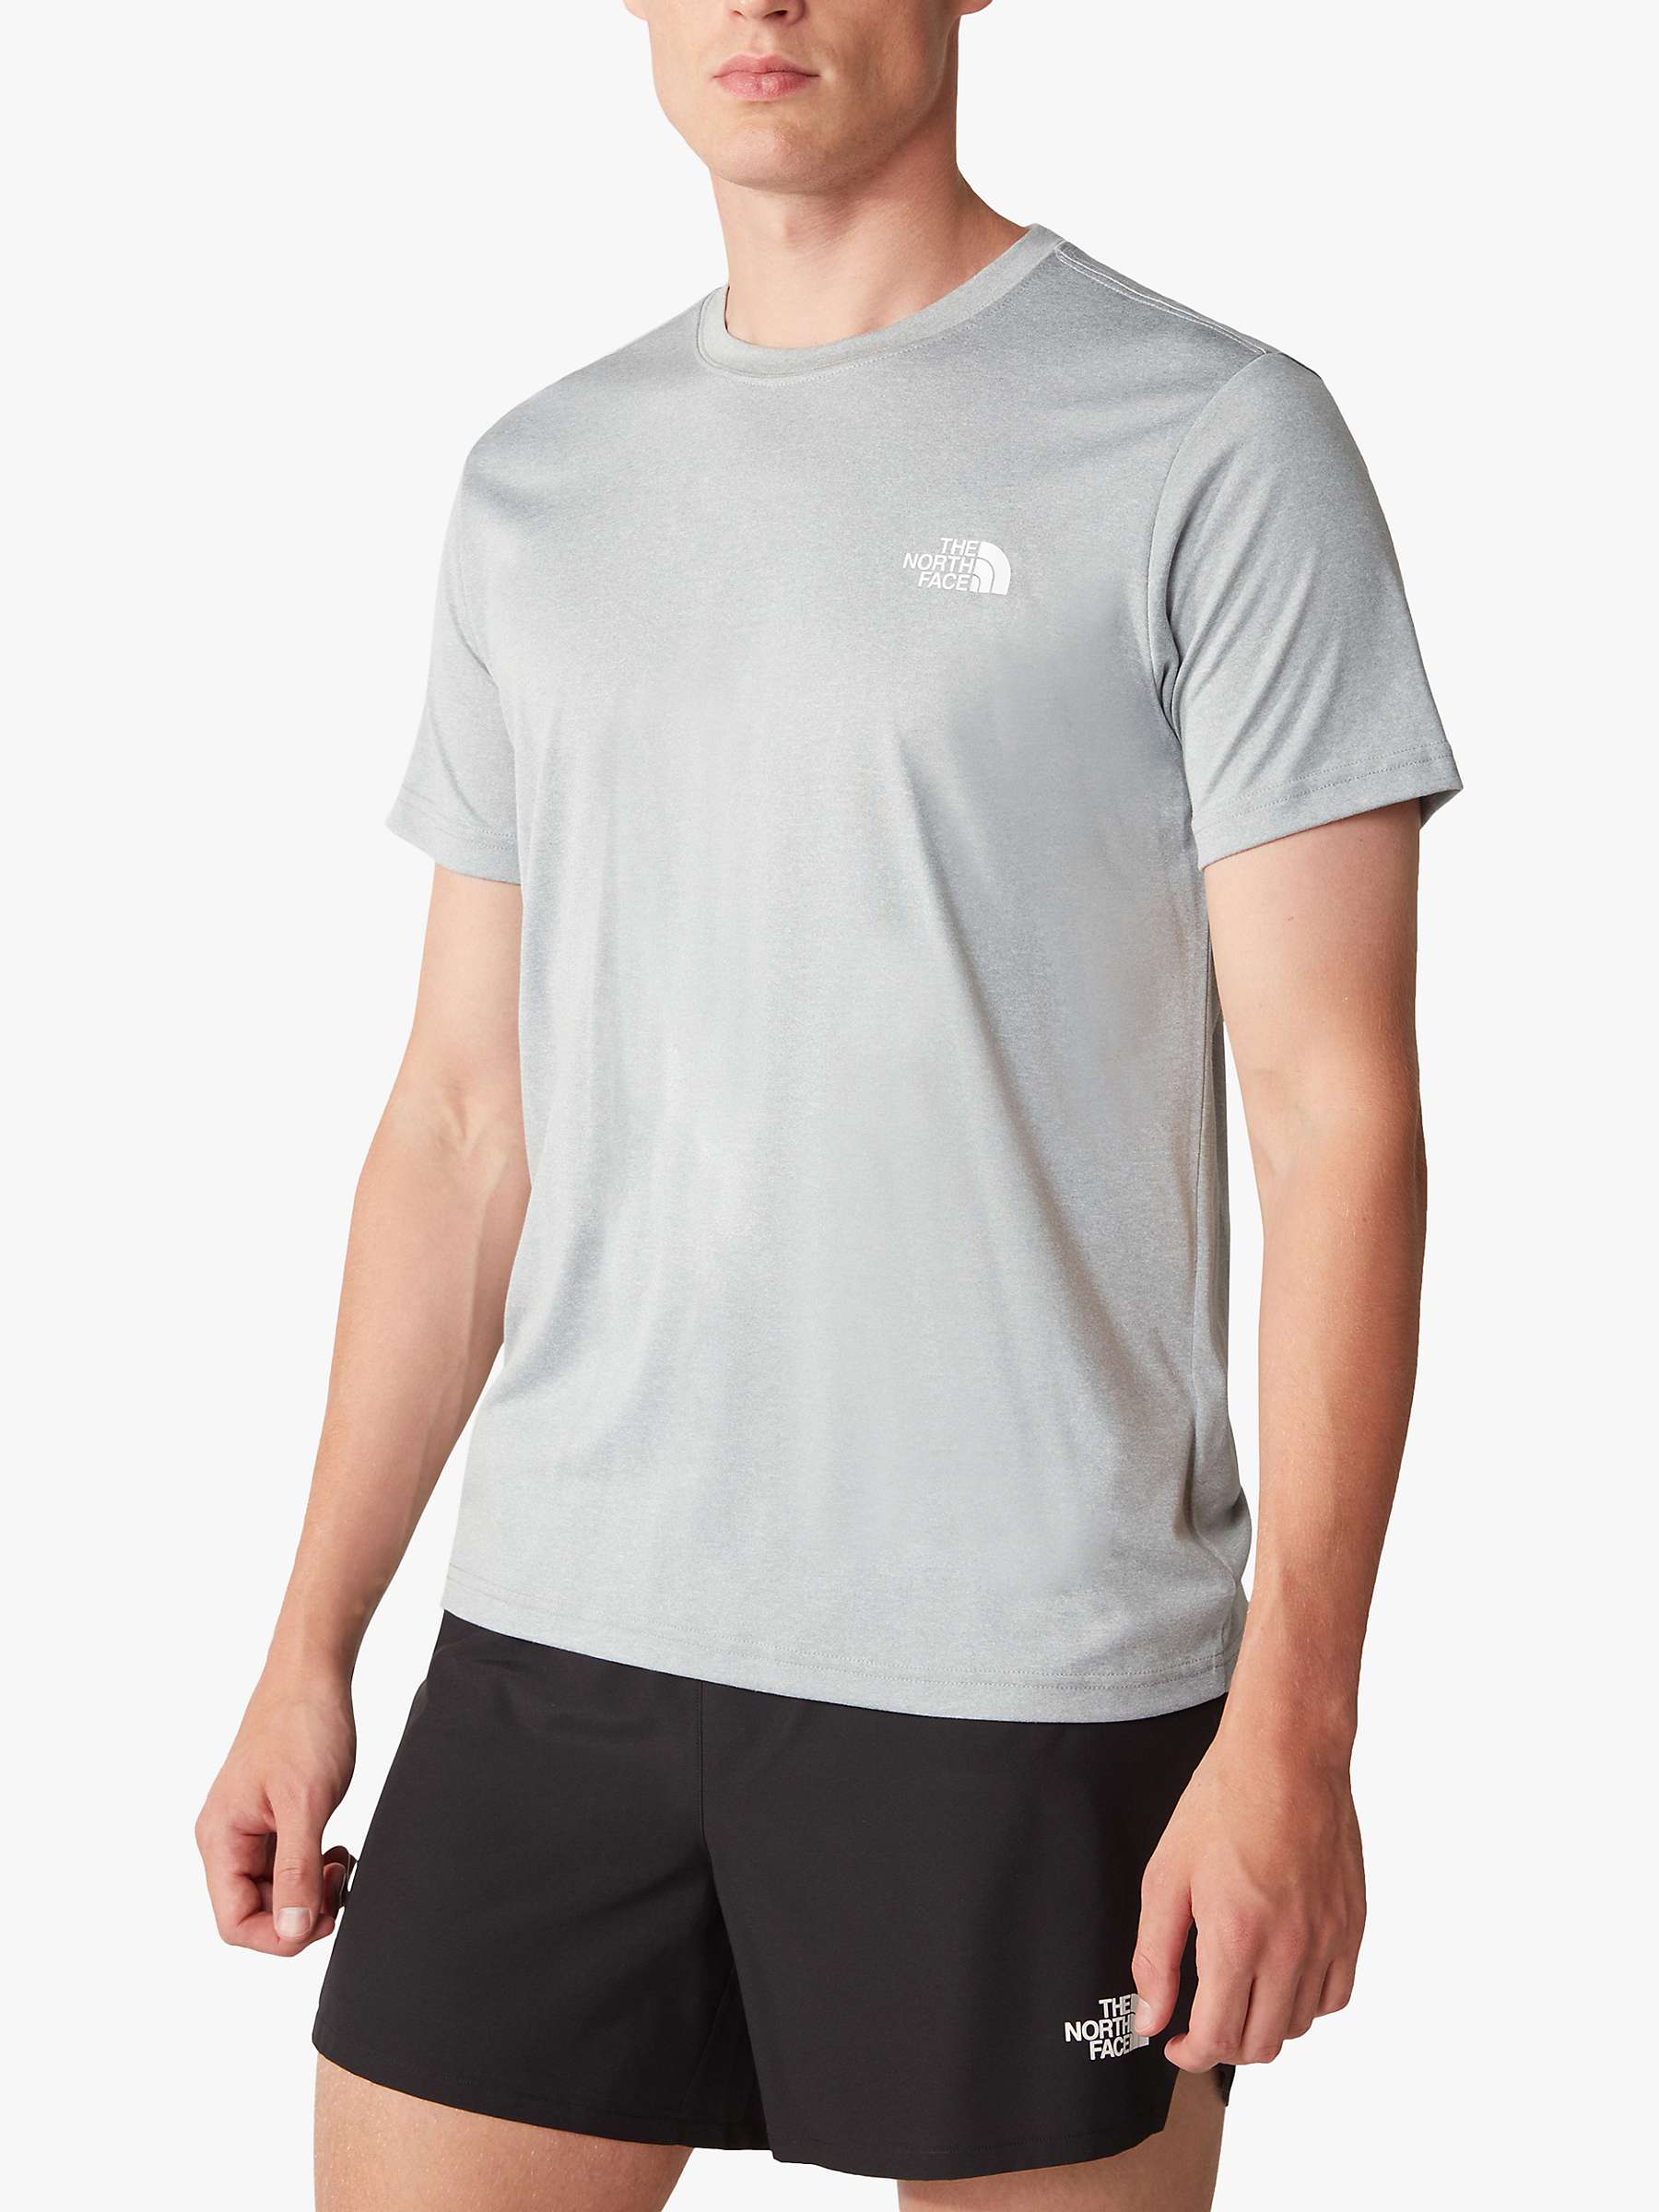 Buy The North Face Reaxion Redbox T-Shirt Online at johnlewis.com